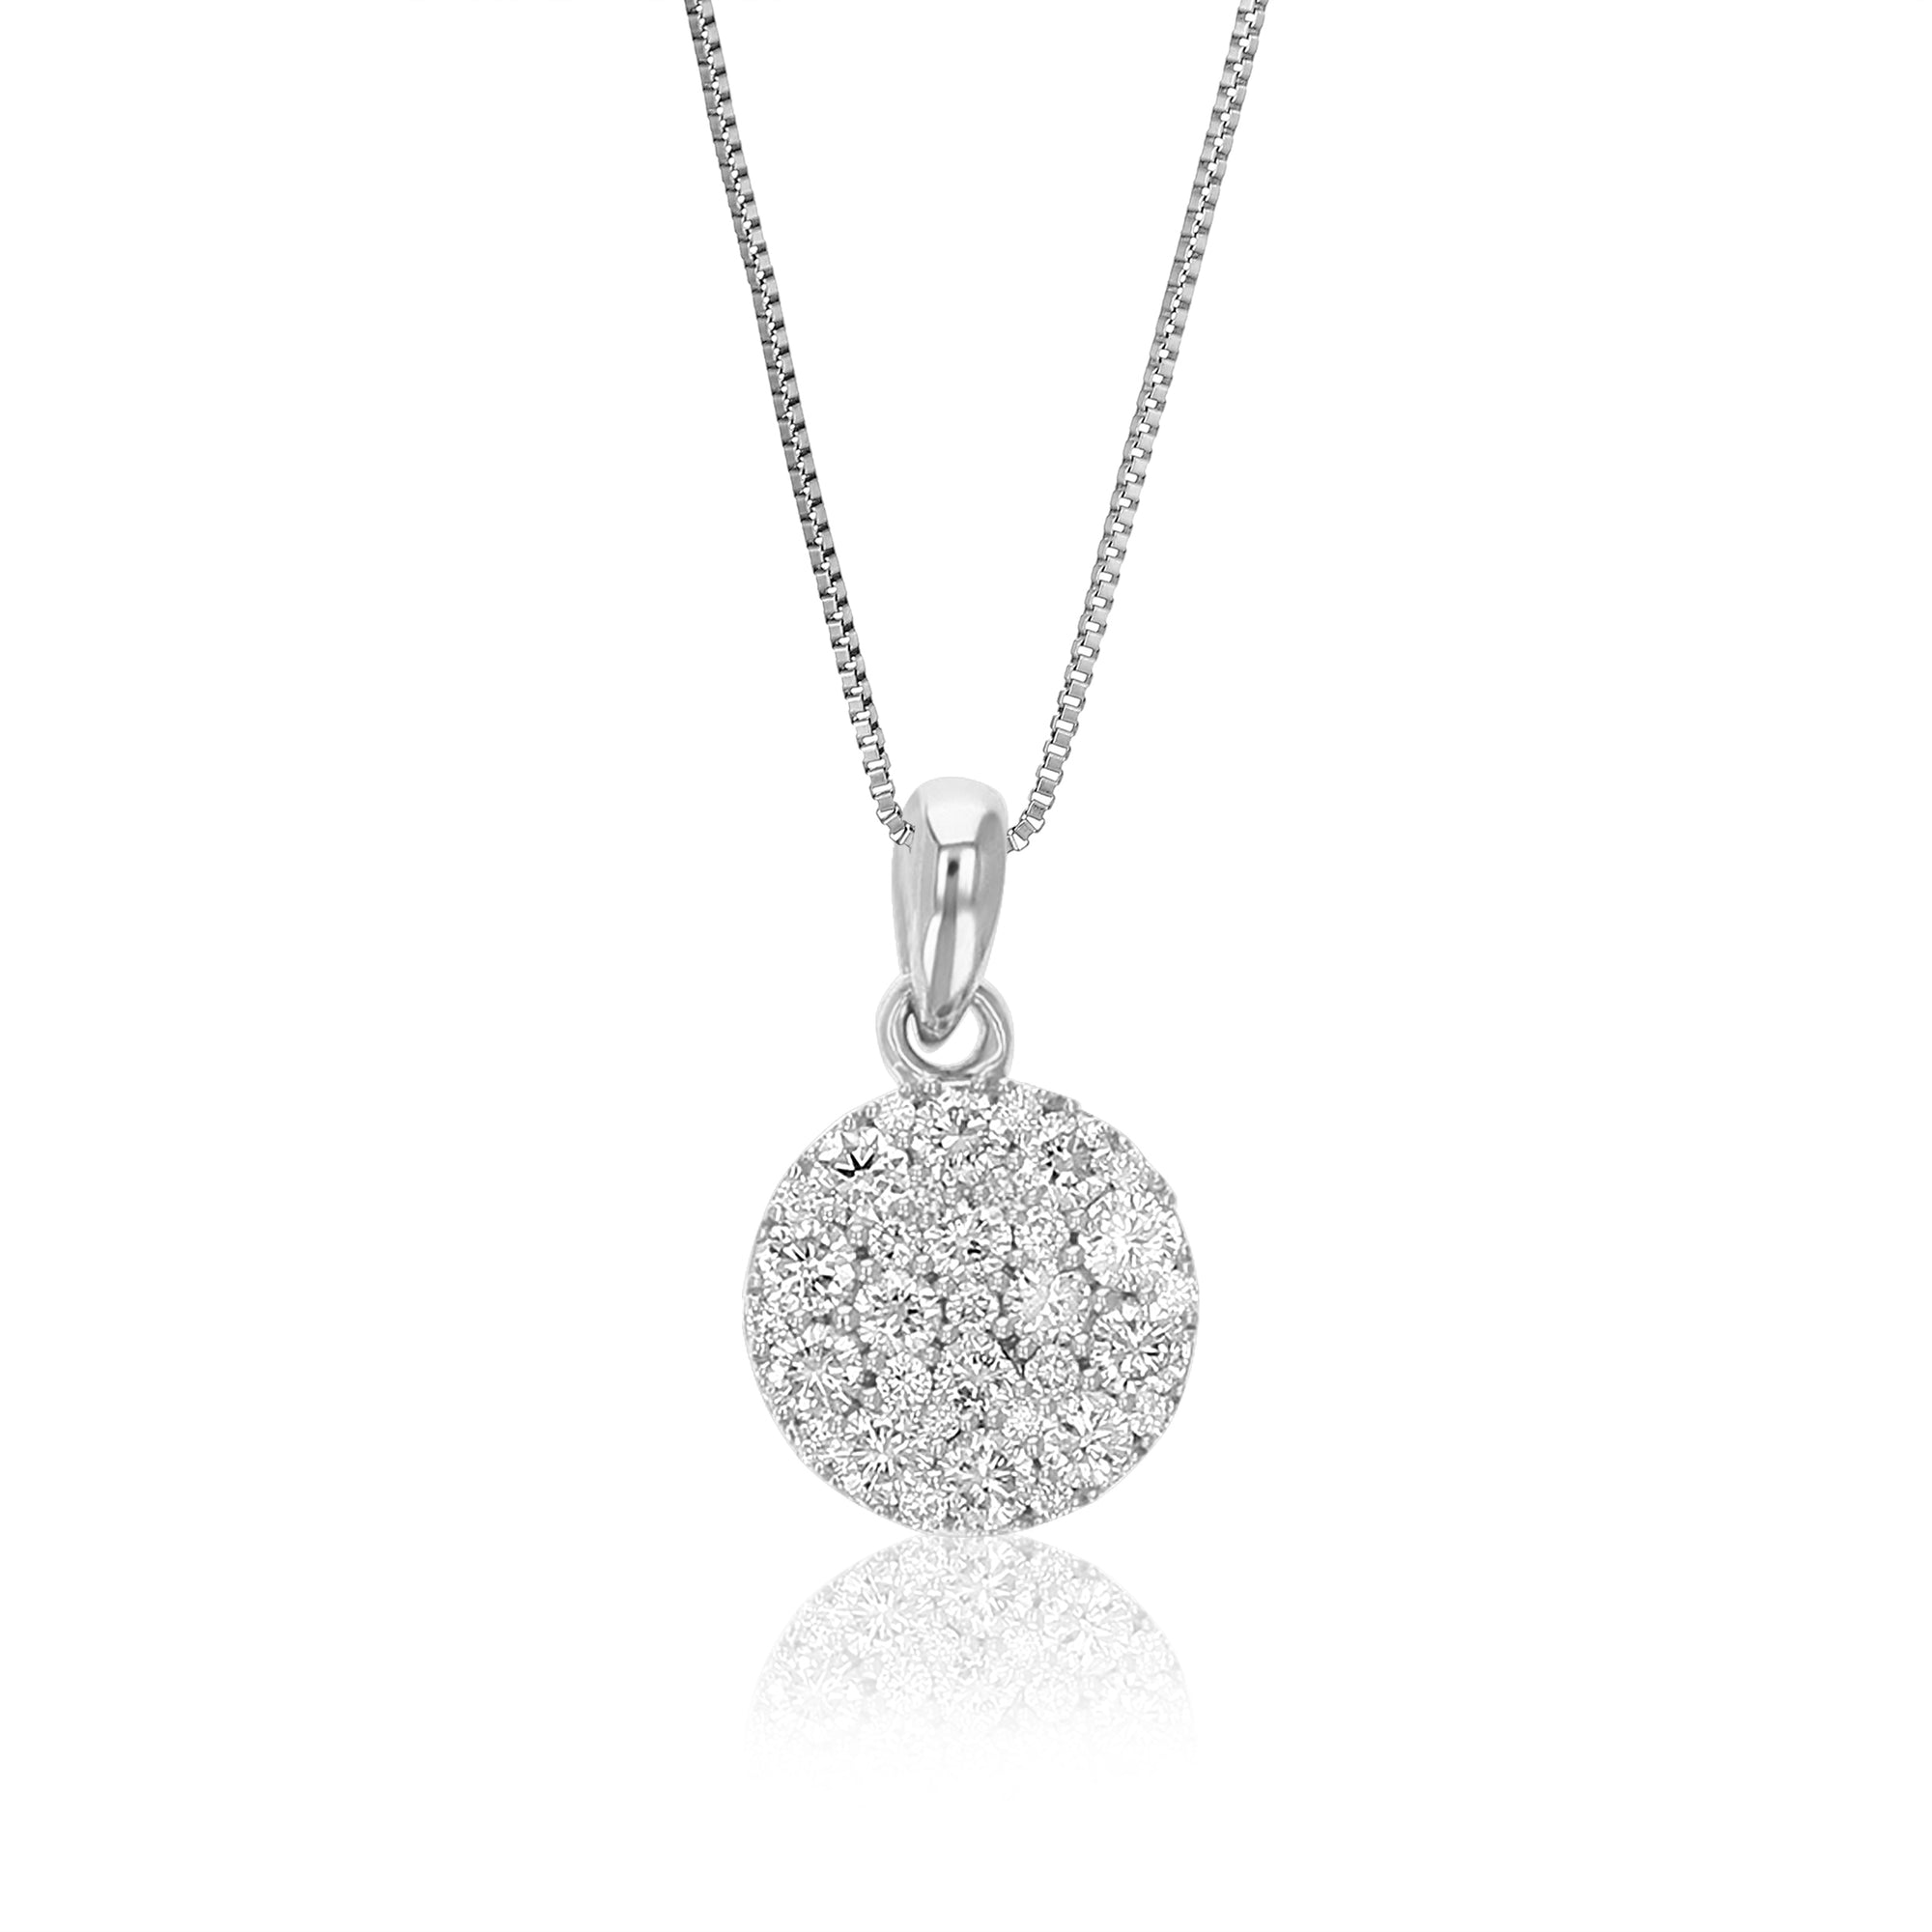 1/2 cttw Diamond Pendant Necklace for Women, Lab Grown Diamond Cluster Pendant Necklace in .925 Sterling Silver with Chain, Size 1/2 Inch